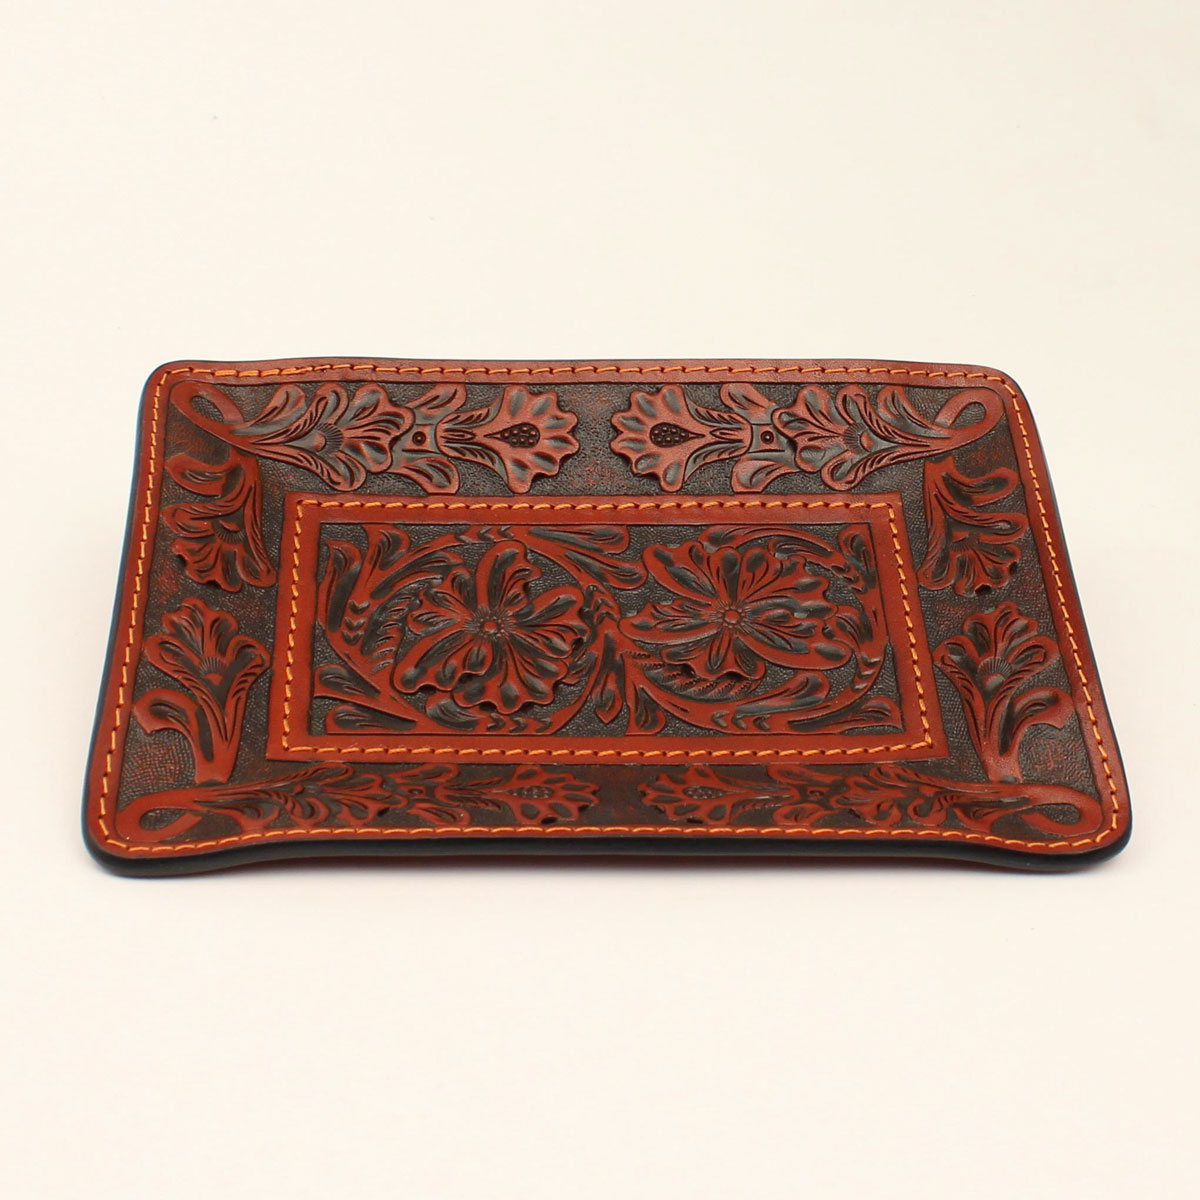 Dhd101 8 X 5.50 In. Floral Hand Tooled Leather Covered Valet Tray, Tan - 8 X 5.50 In.